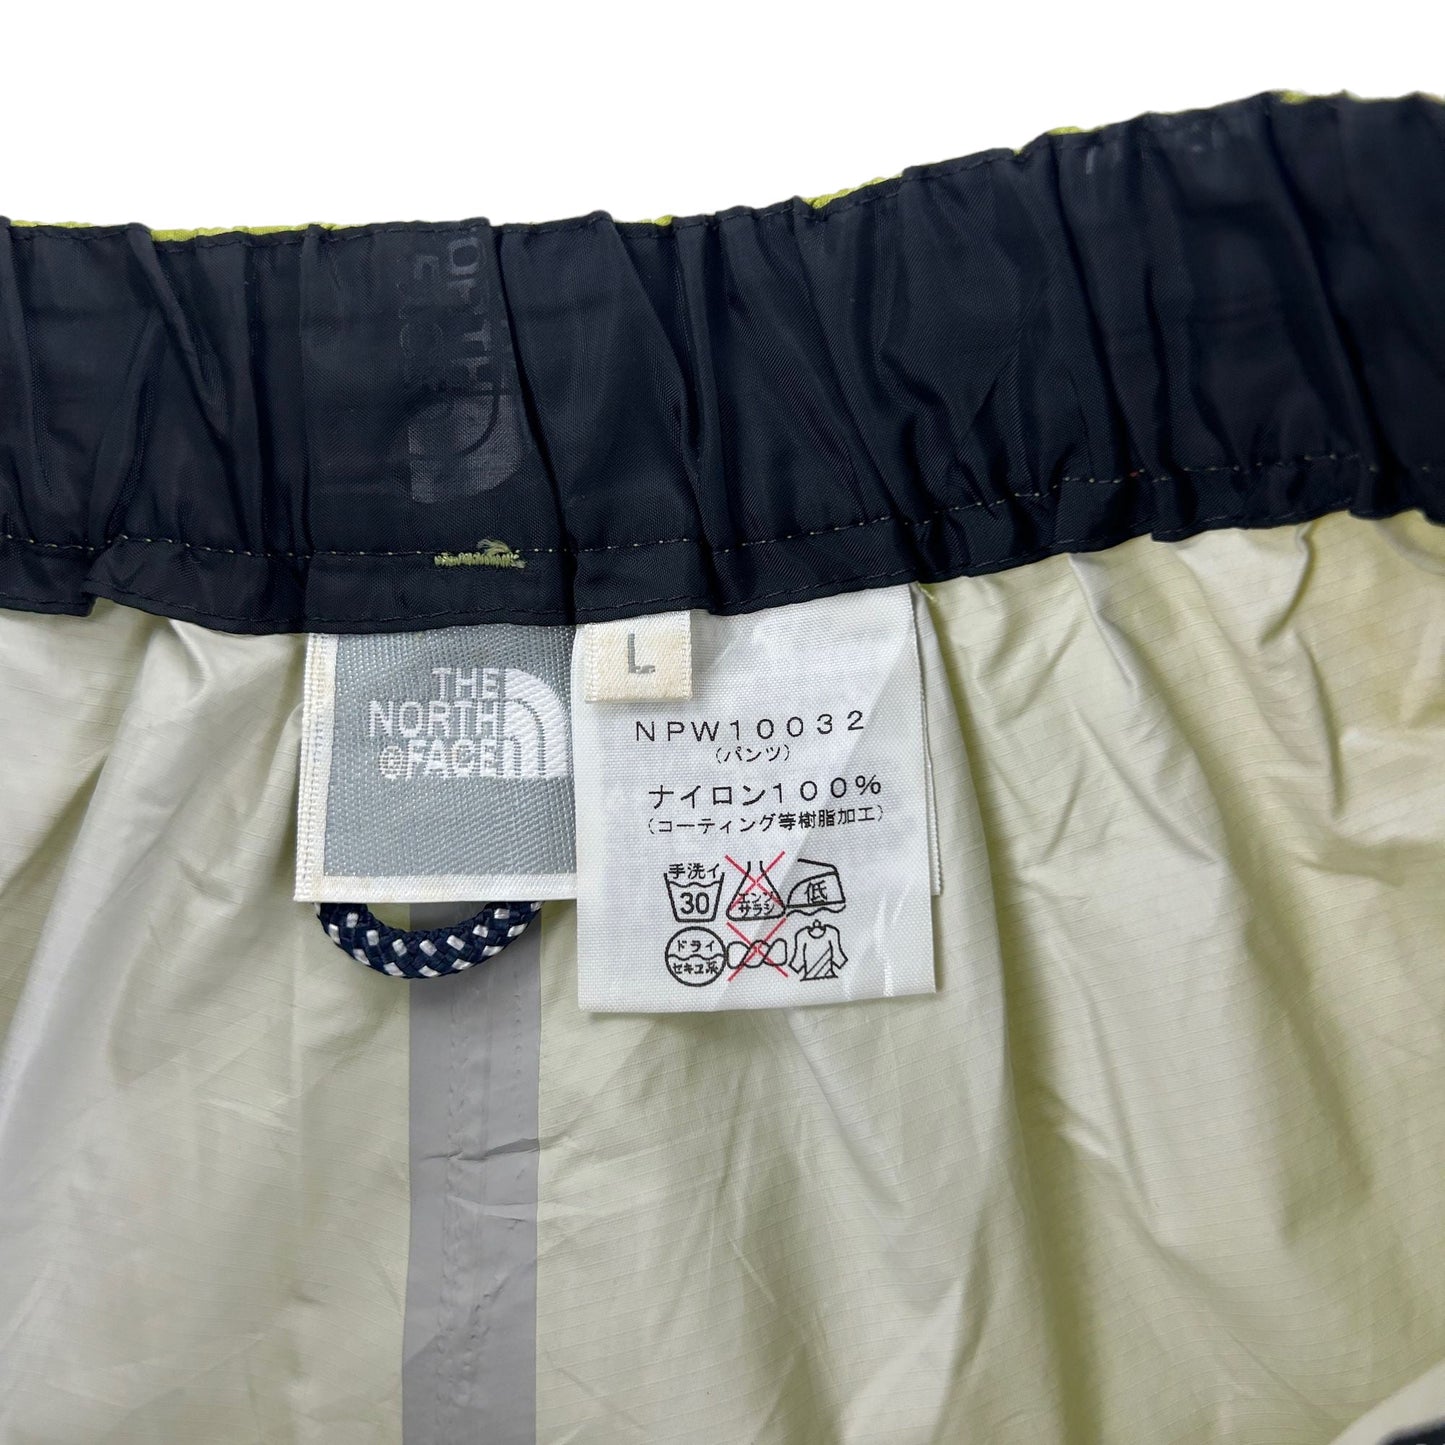 Vintage The North Face Waterproof Trousers Woman's Size L